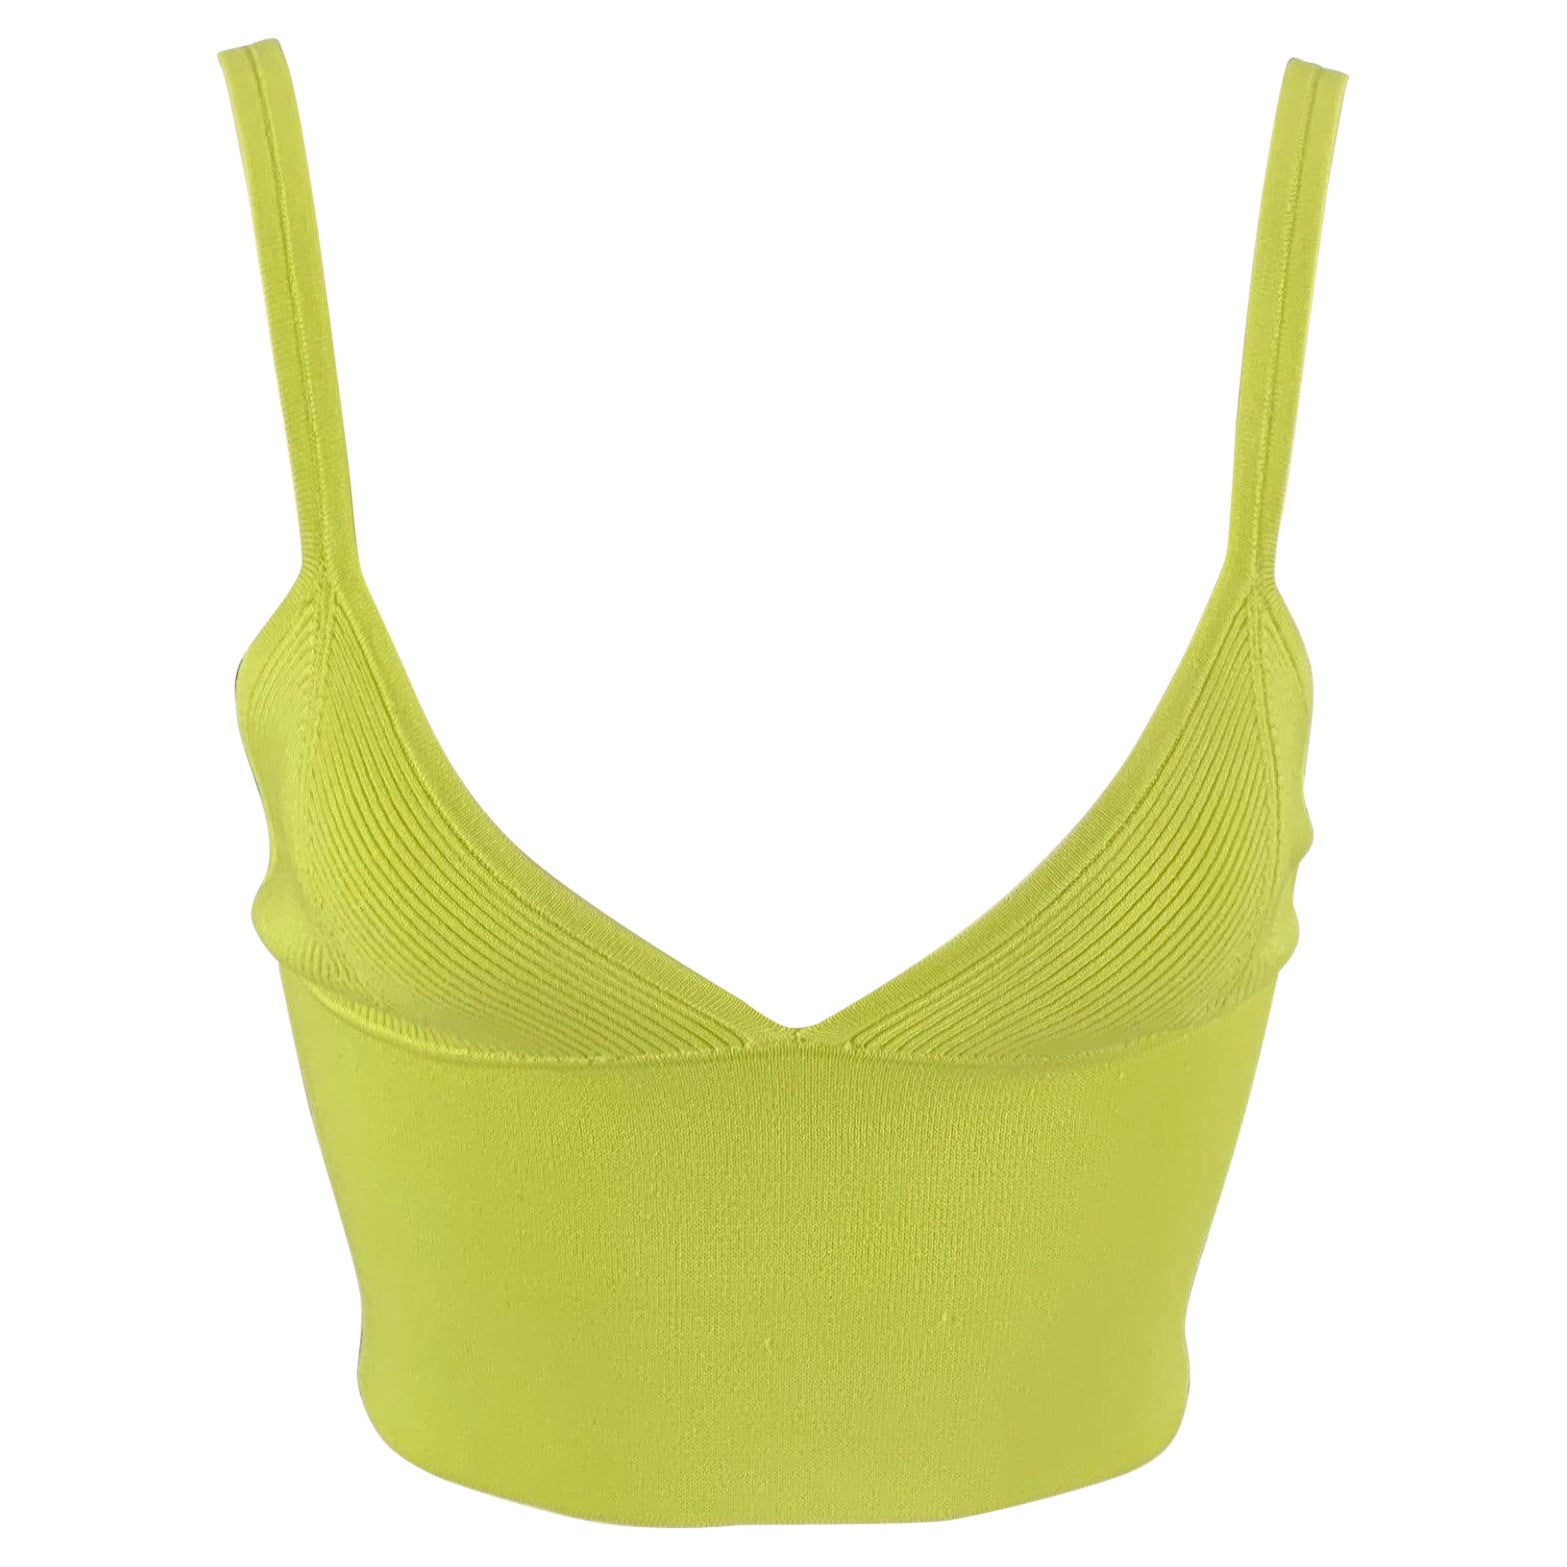 DION LEE Size 2 Neon Yellow Rayon Blend Density Bralette For Sale